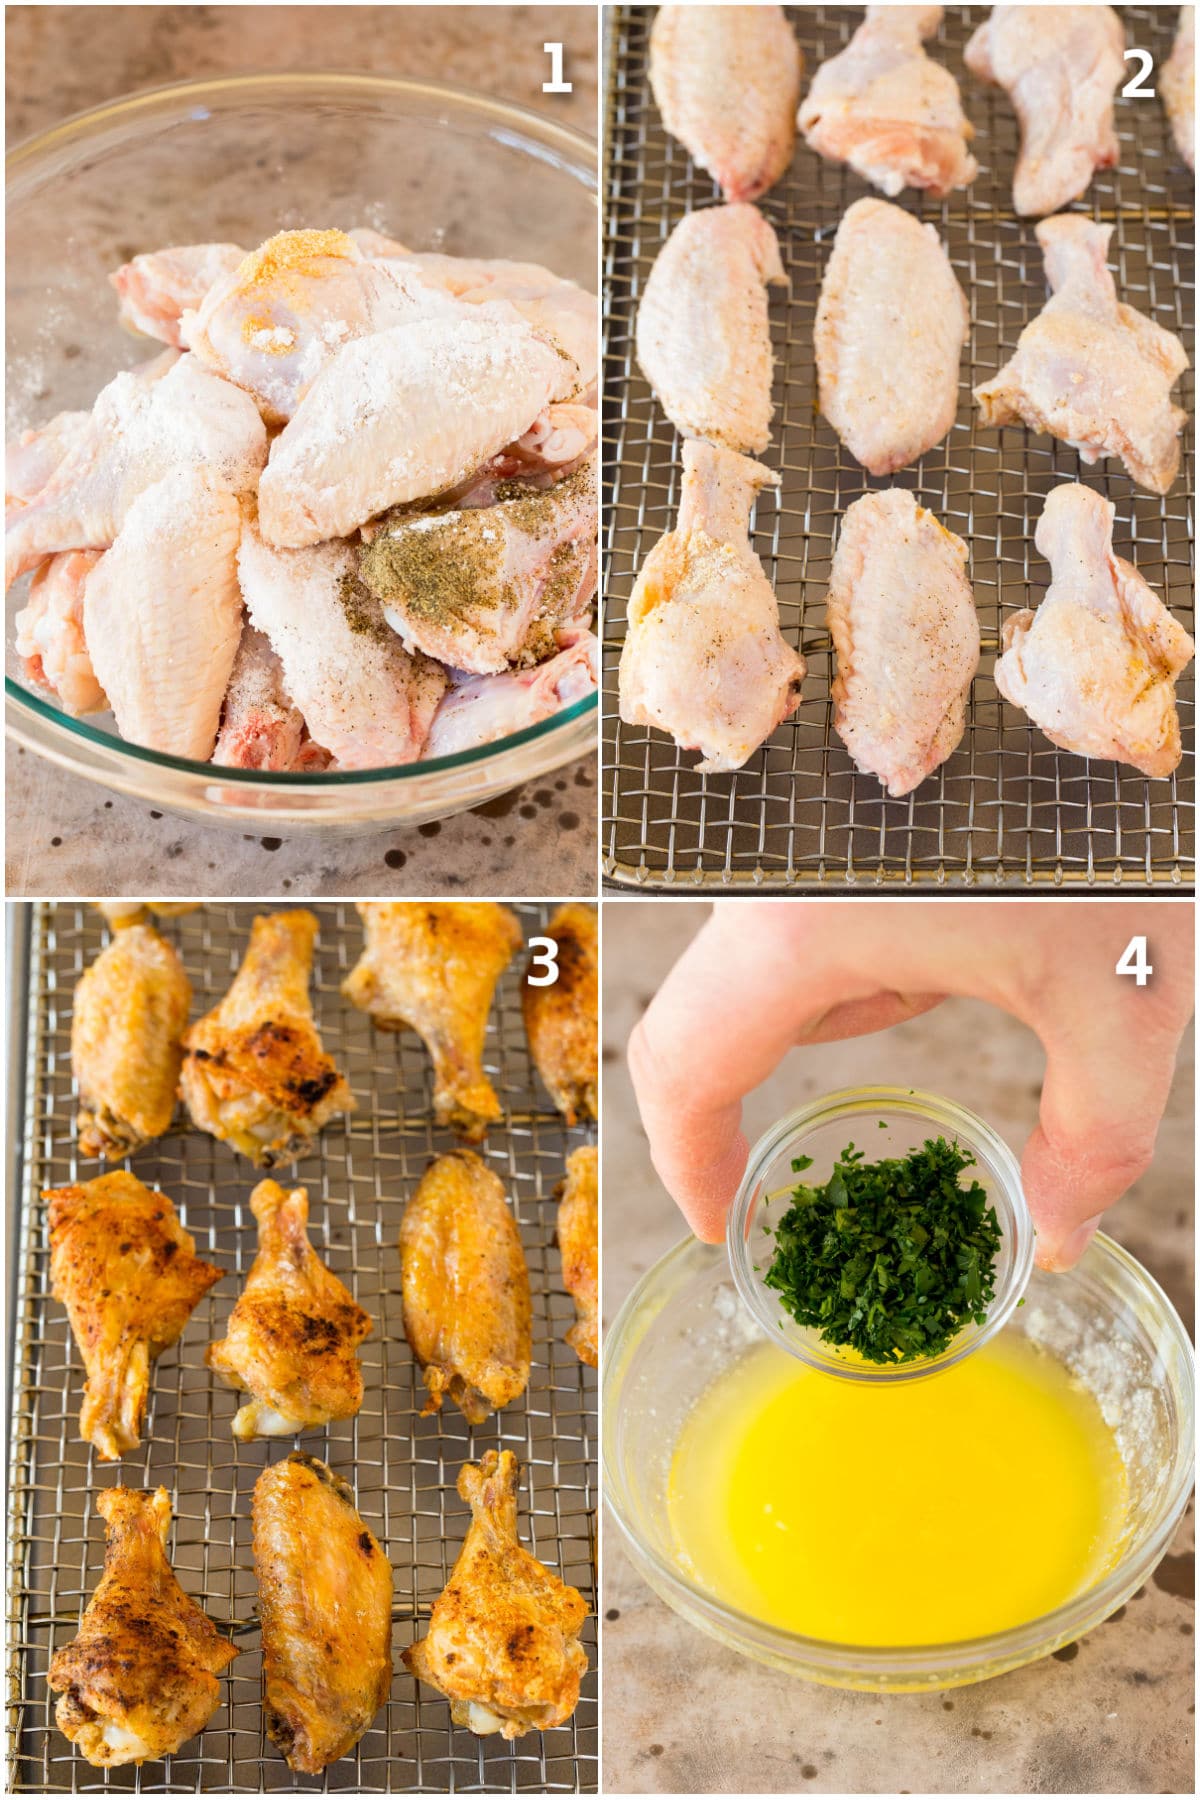 Step by step process shots showing how to cook chicken wings and make garlic butter.